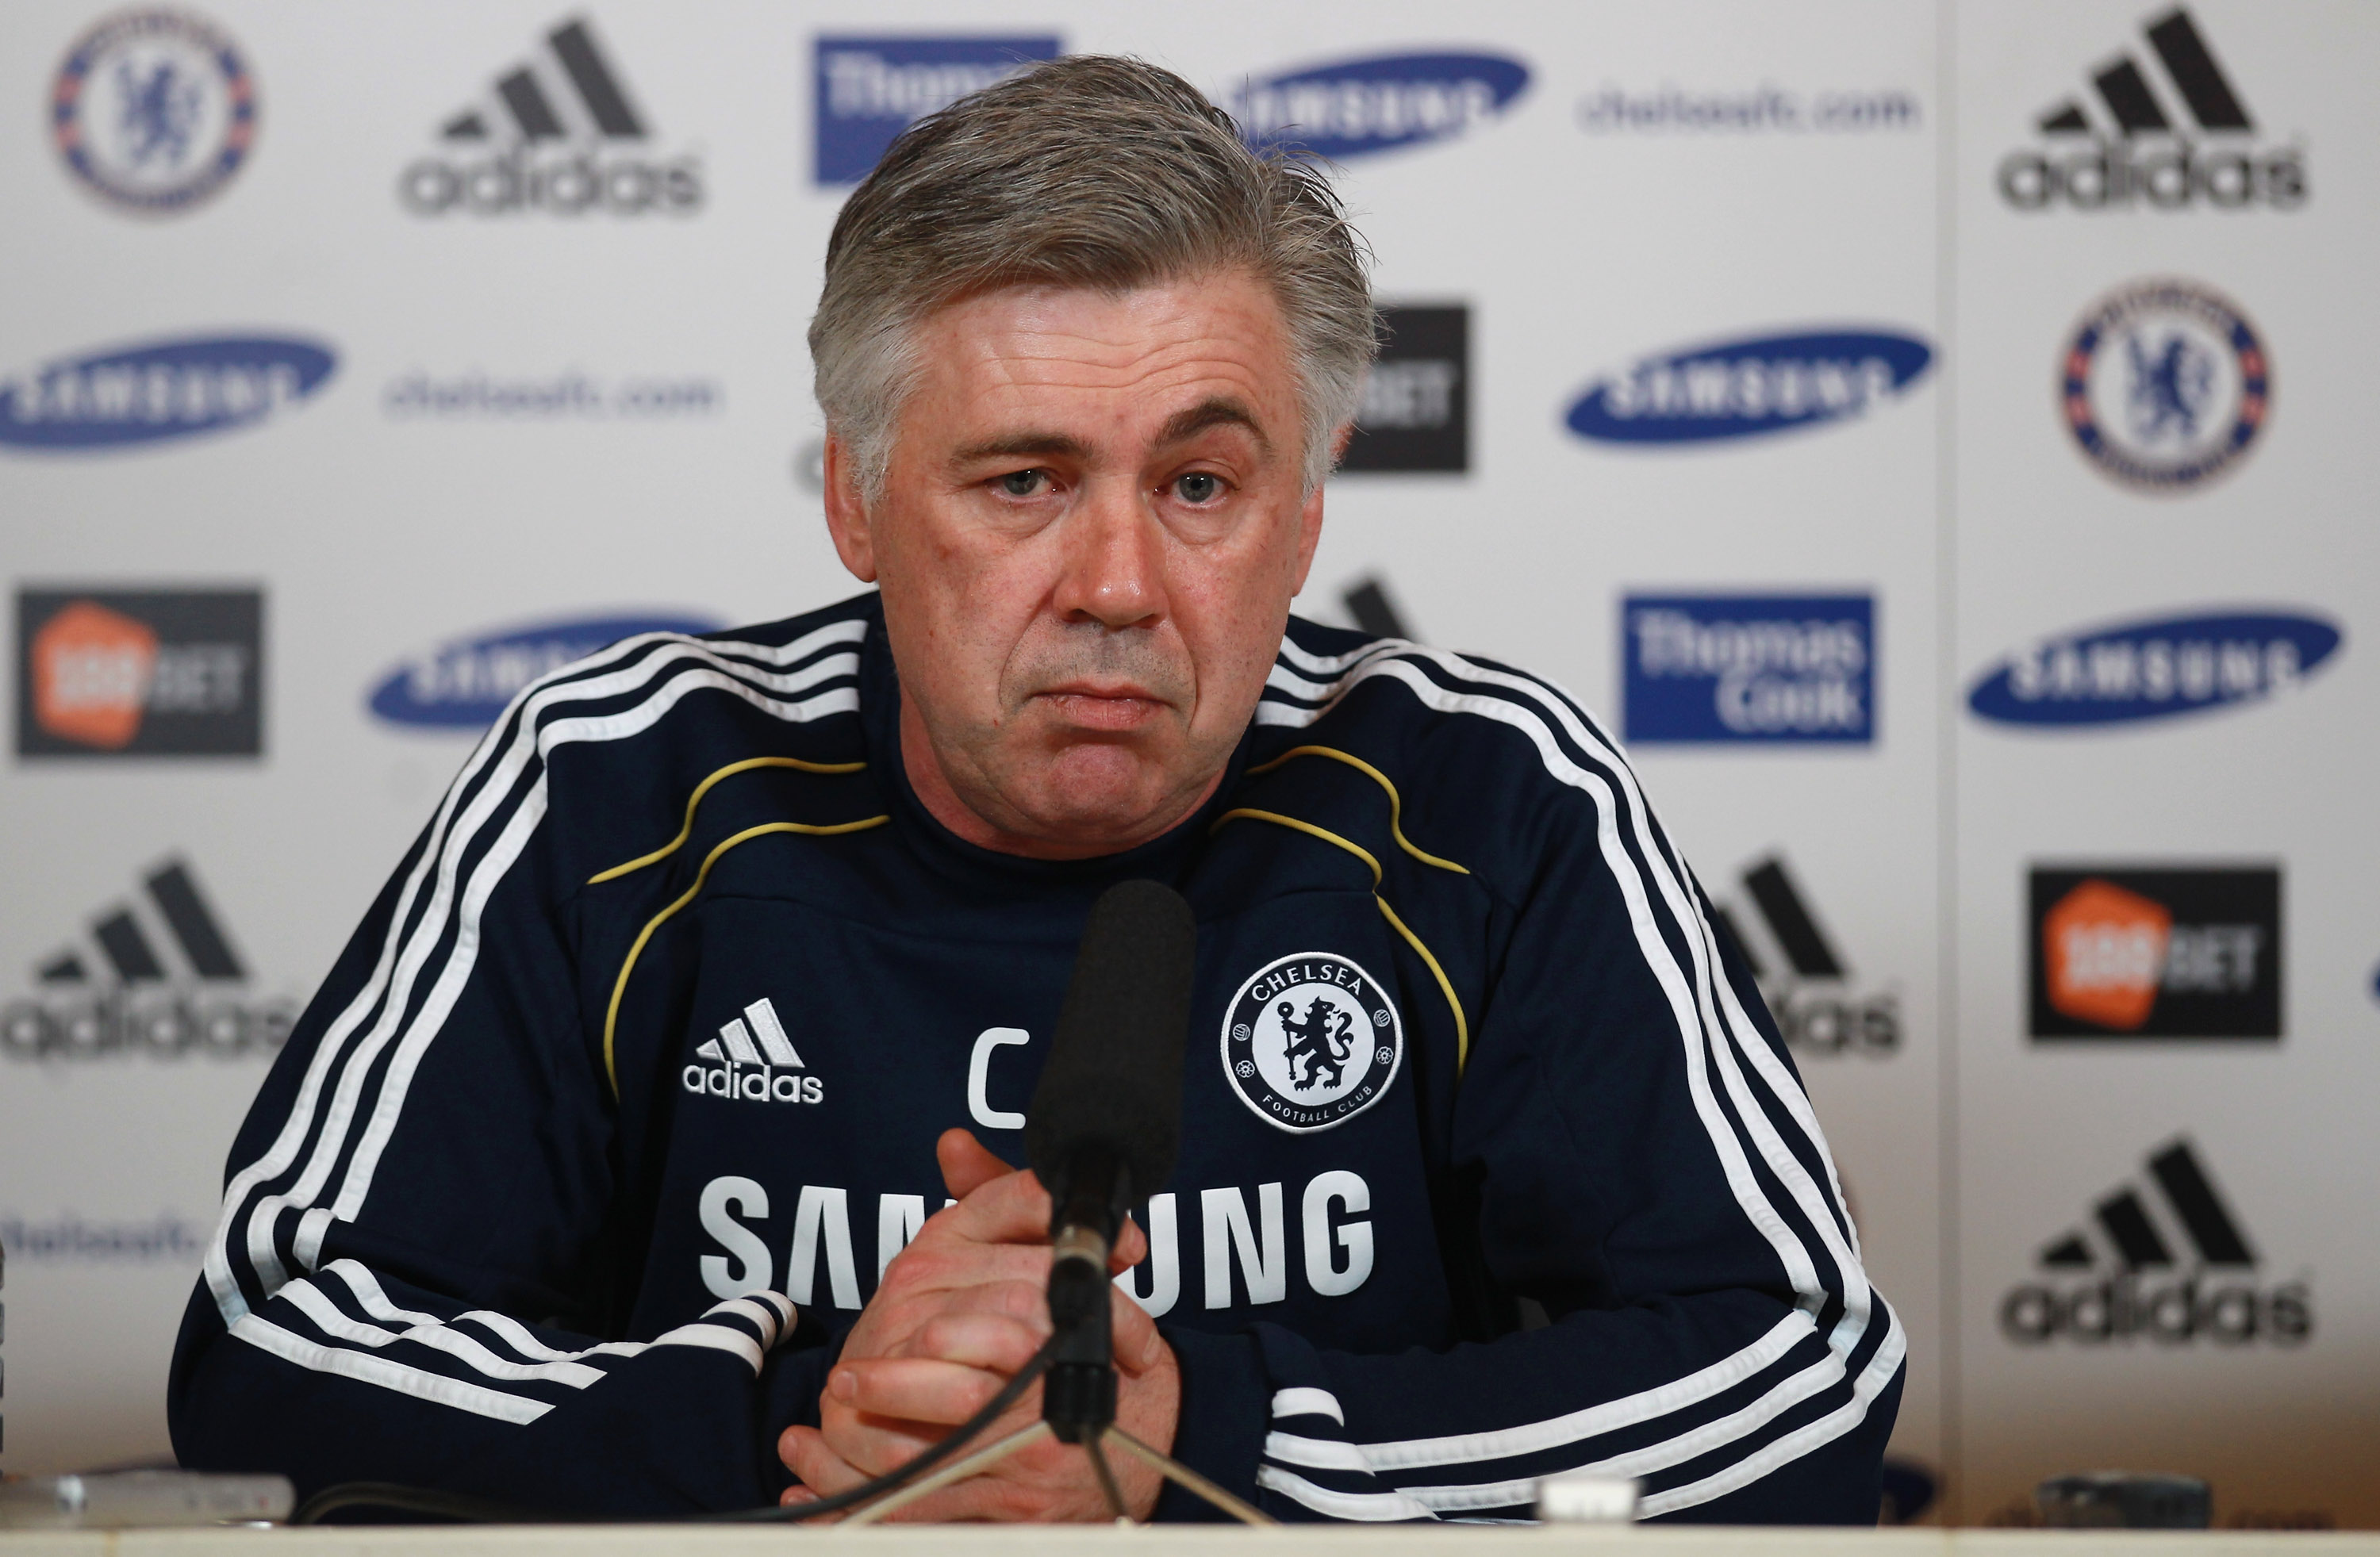 COBHAM, ENGLAND - FEBRUARY 11:  Chelsea manager Carlo Ancelotti address a press conference at the Cobham training ground on February 11, 2011 in Cobham, England.  (Photo by Warren Little/Getty Images)